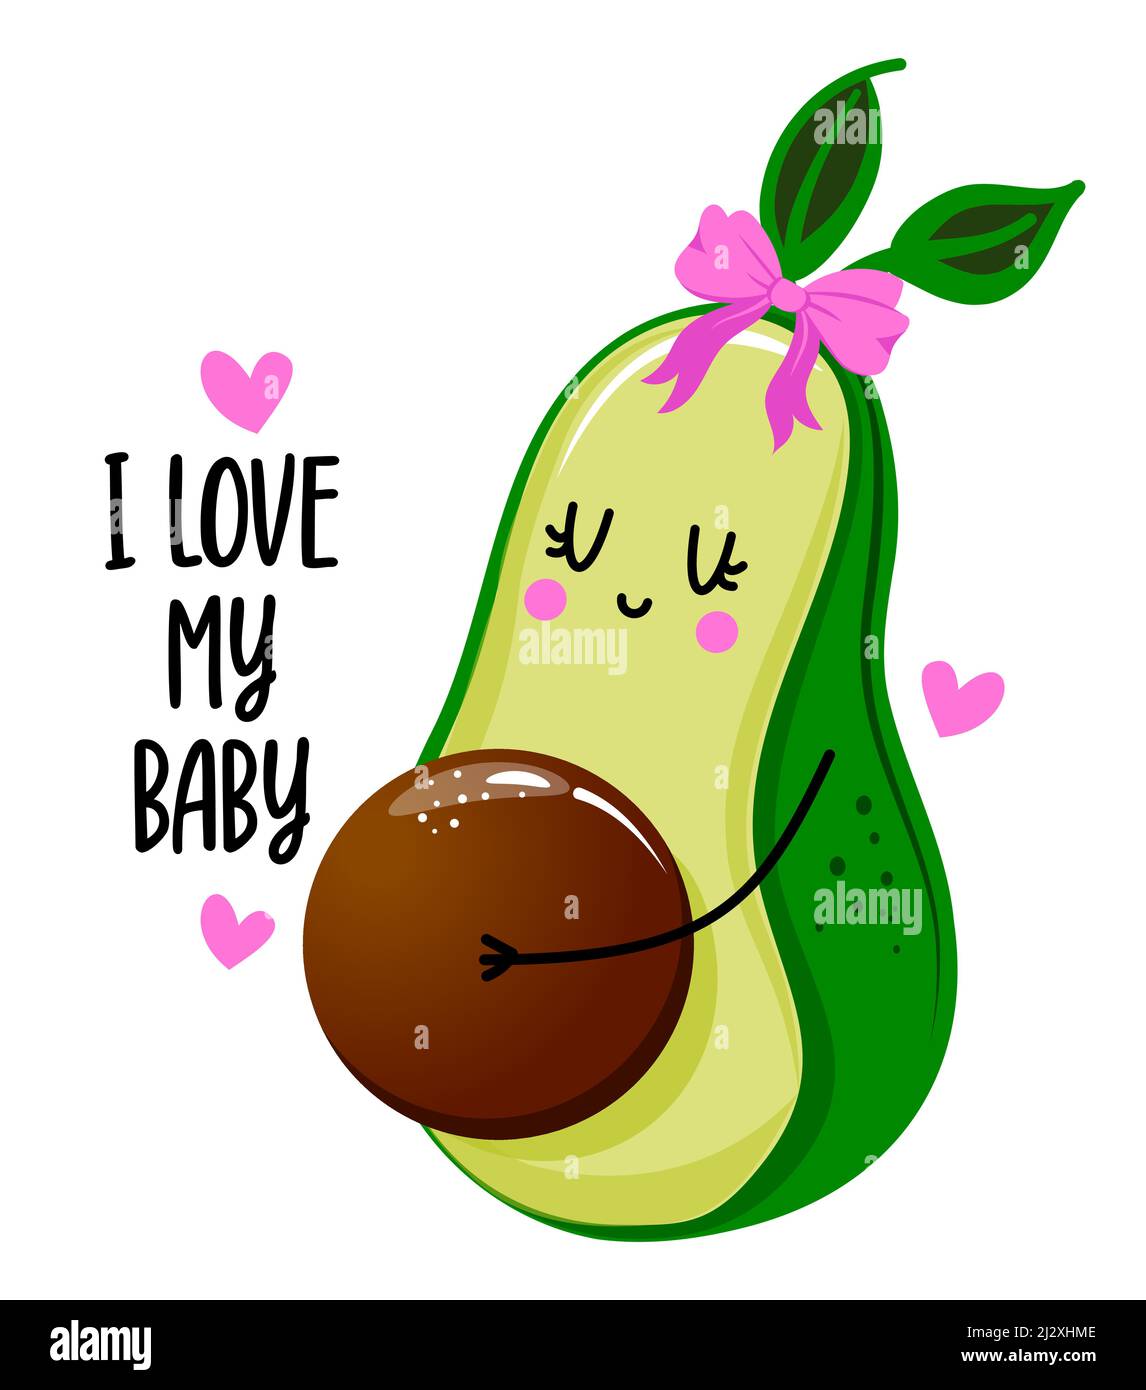 I love my baby - Cute hand drawn pregnant avocado illustration kawaii style. Mother's Day color poster. Good for greeting cards, banners, textiles, gi Stock Vector